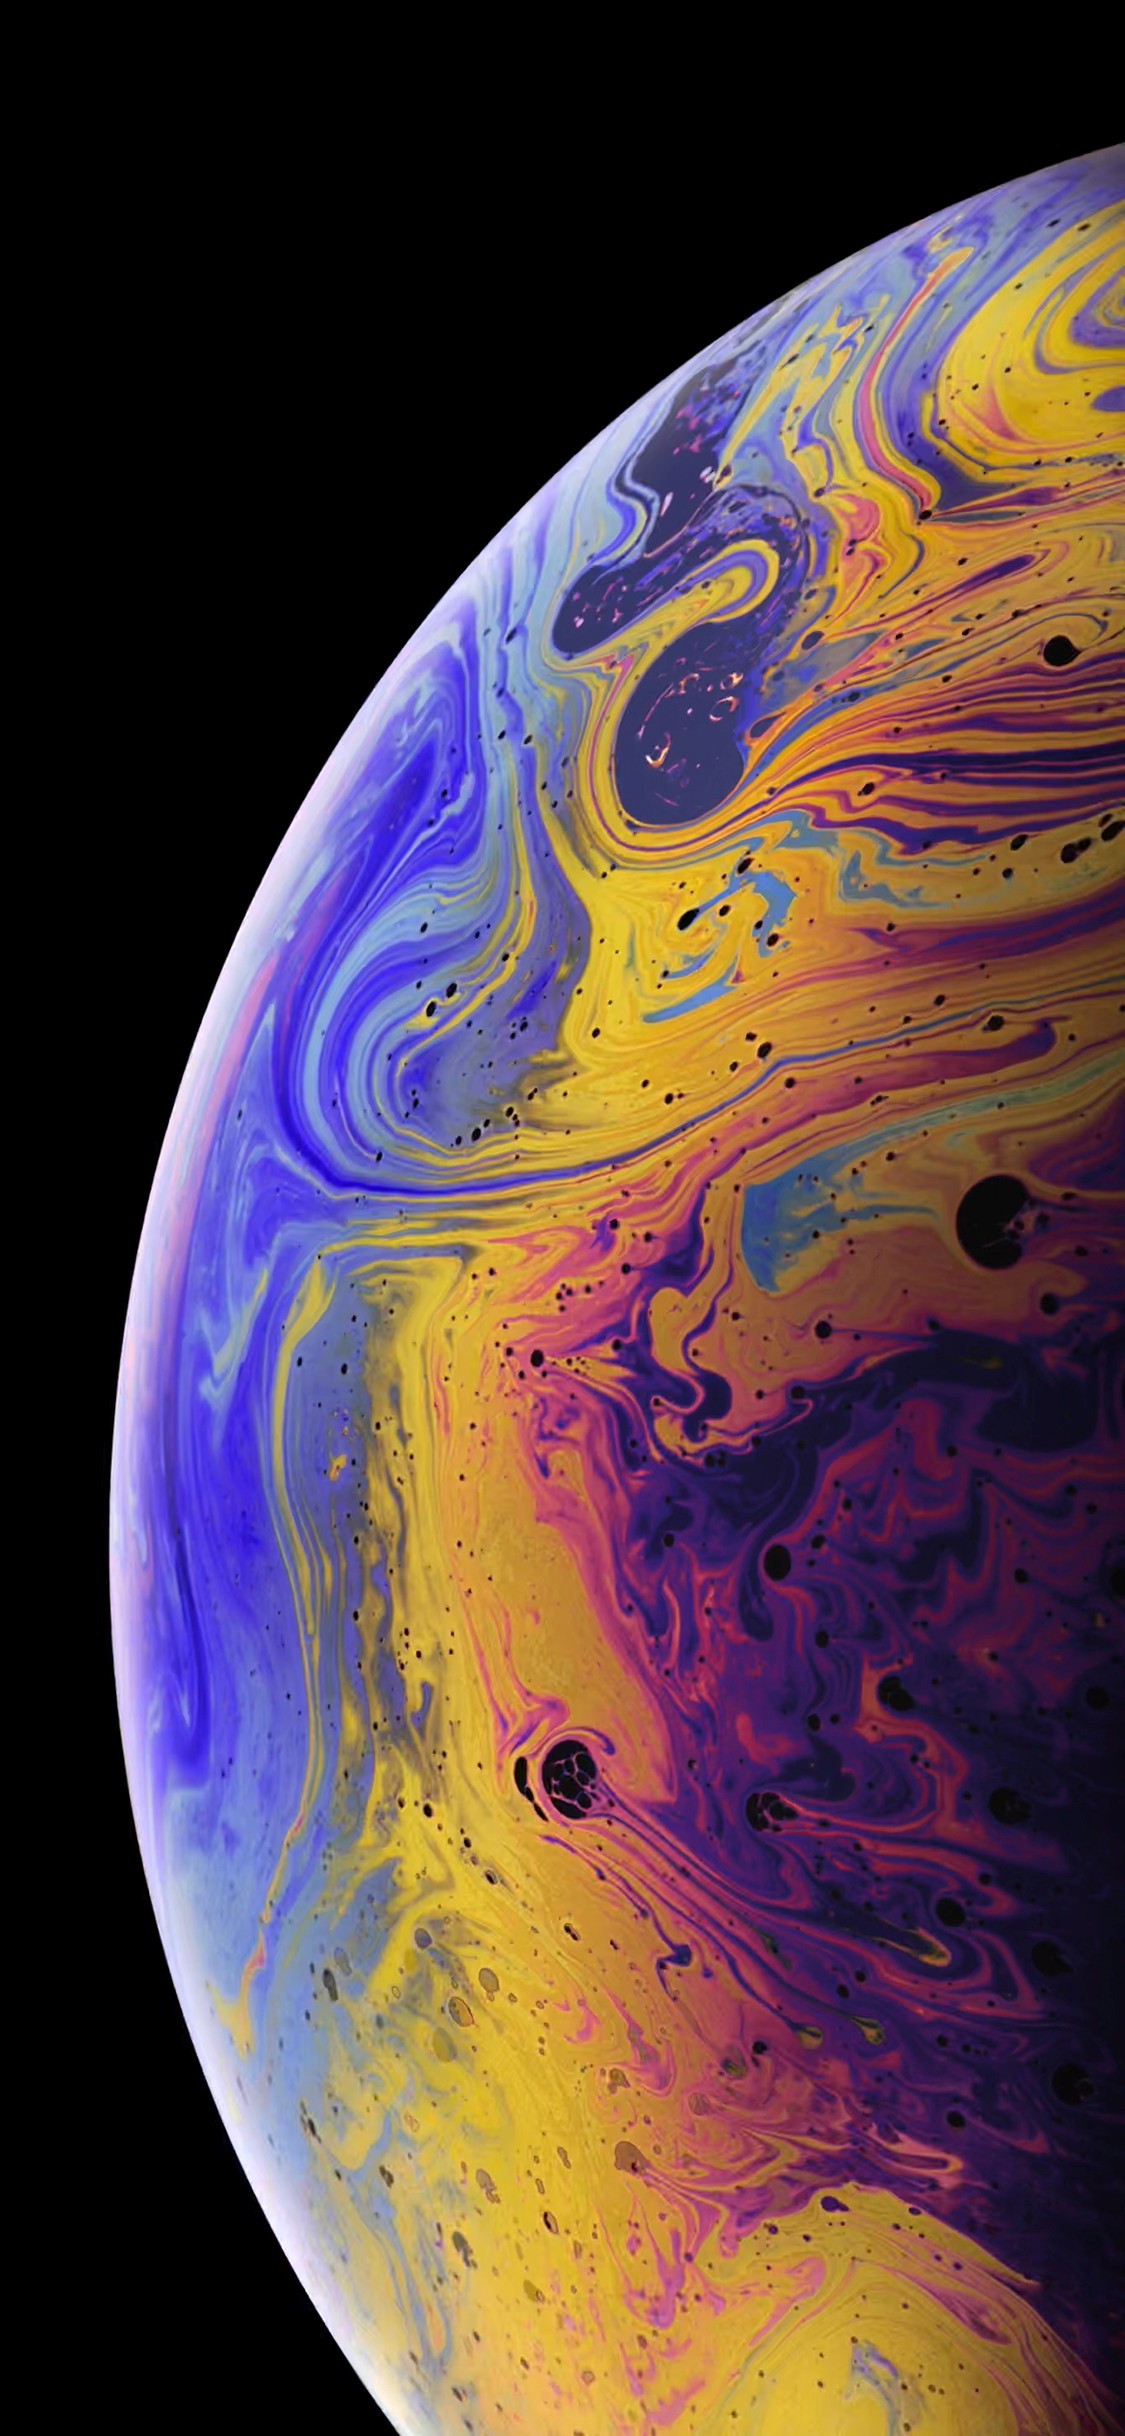 iPhone XS Wallpaper Lock Screen With high-resolution 1125X2436 pixel. You can set as wallpaper for Apple iPhone X, XS Max, XR, 8, 7, 6, SE, iPad. Enjoy and share your favorite HD wallpapers and background images